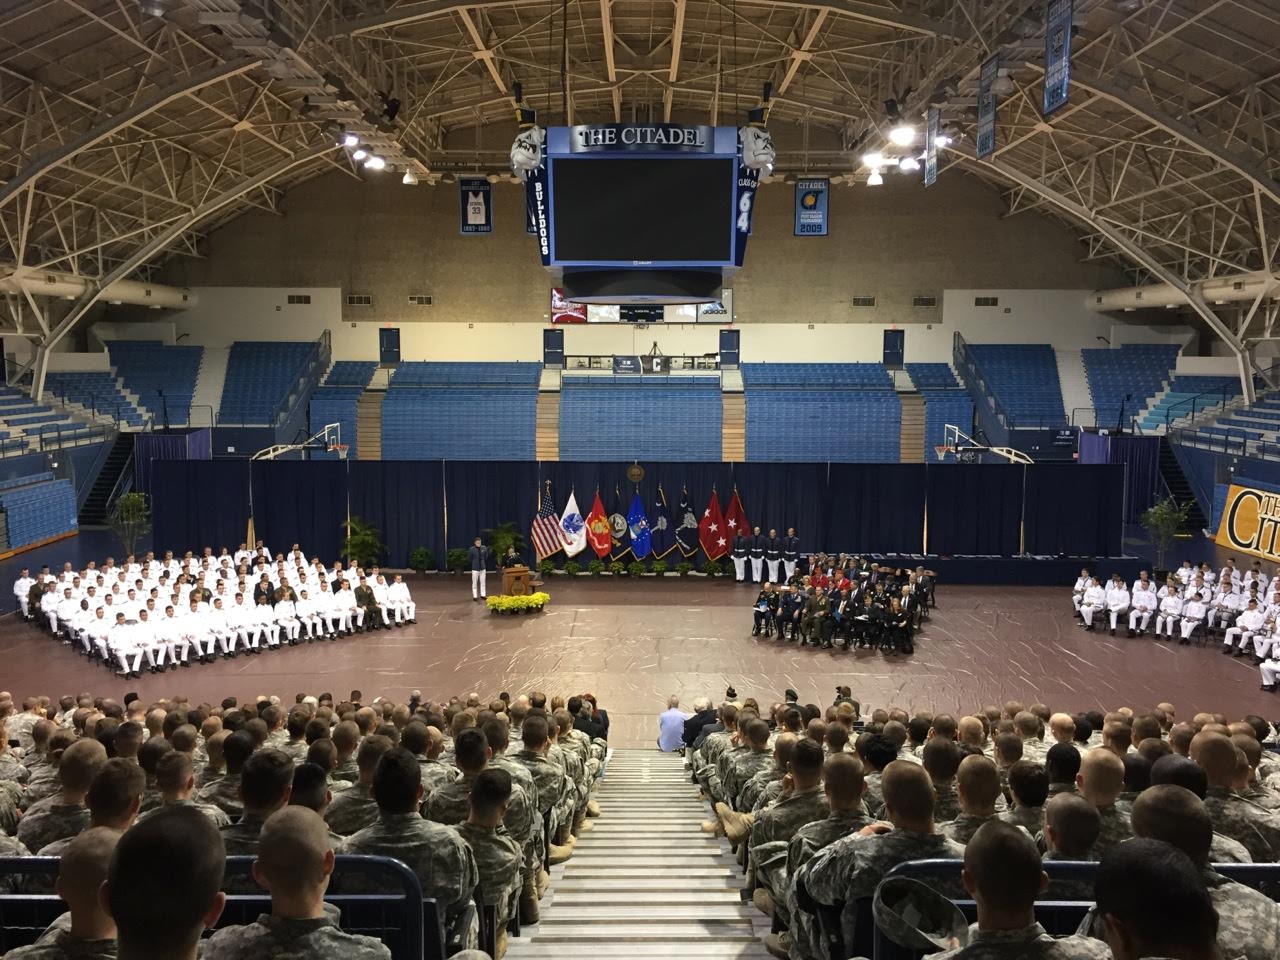 STONY POINT WOMAN RECOGNIZED FOR PARTICIPATION IN CITADEL’S ROTC PROGRAM